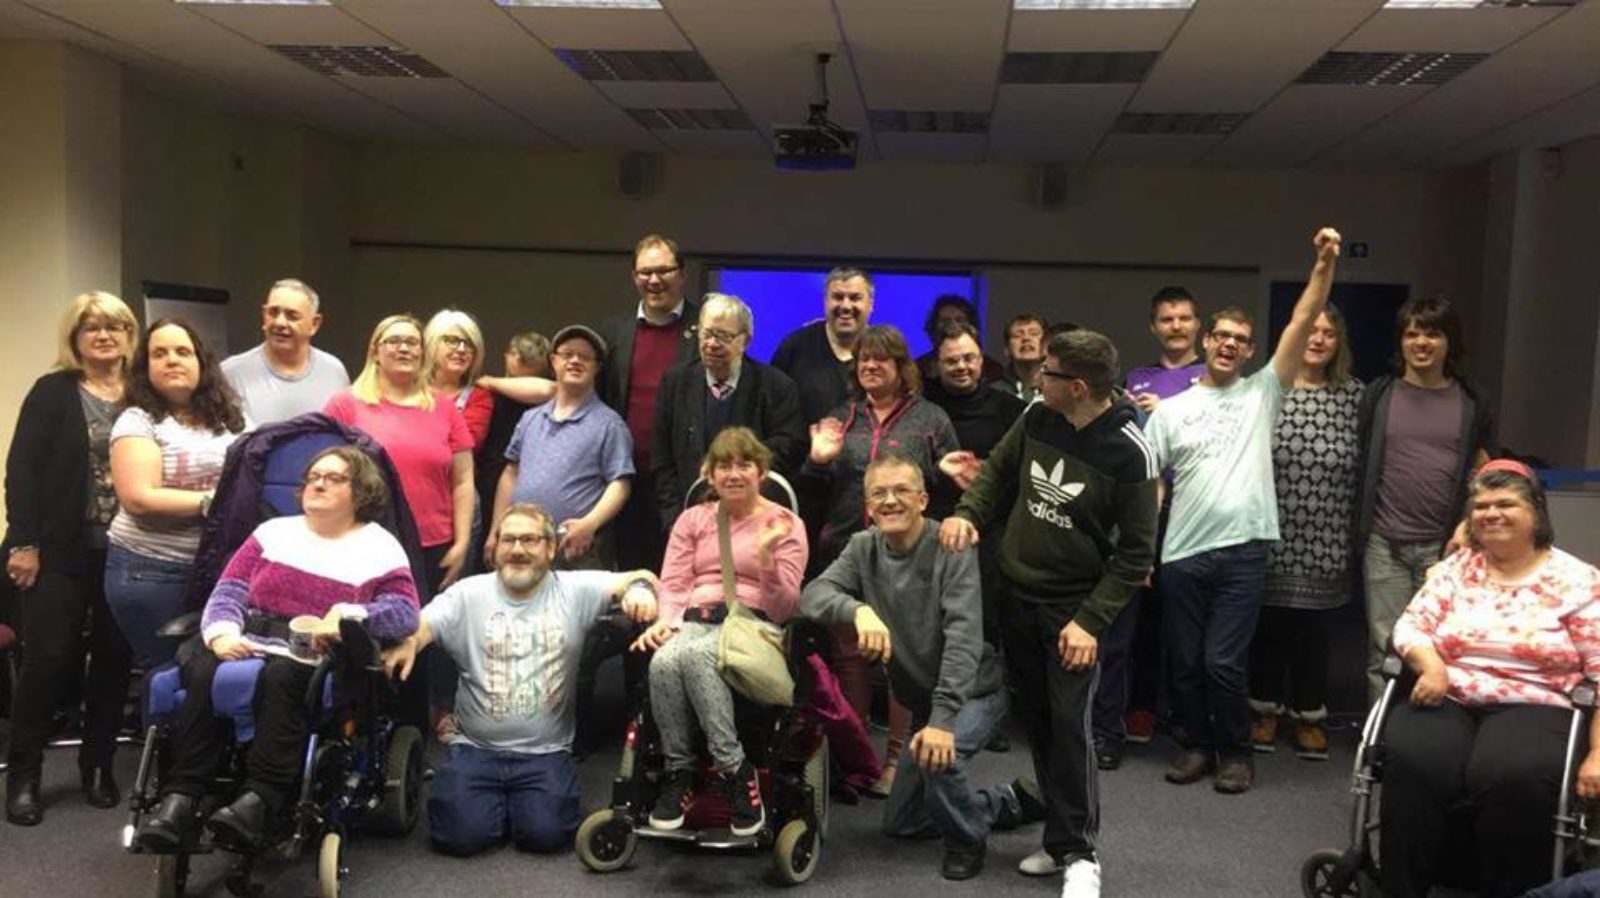 Gareth with members and volunteers from Inter-Theatre CIC